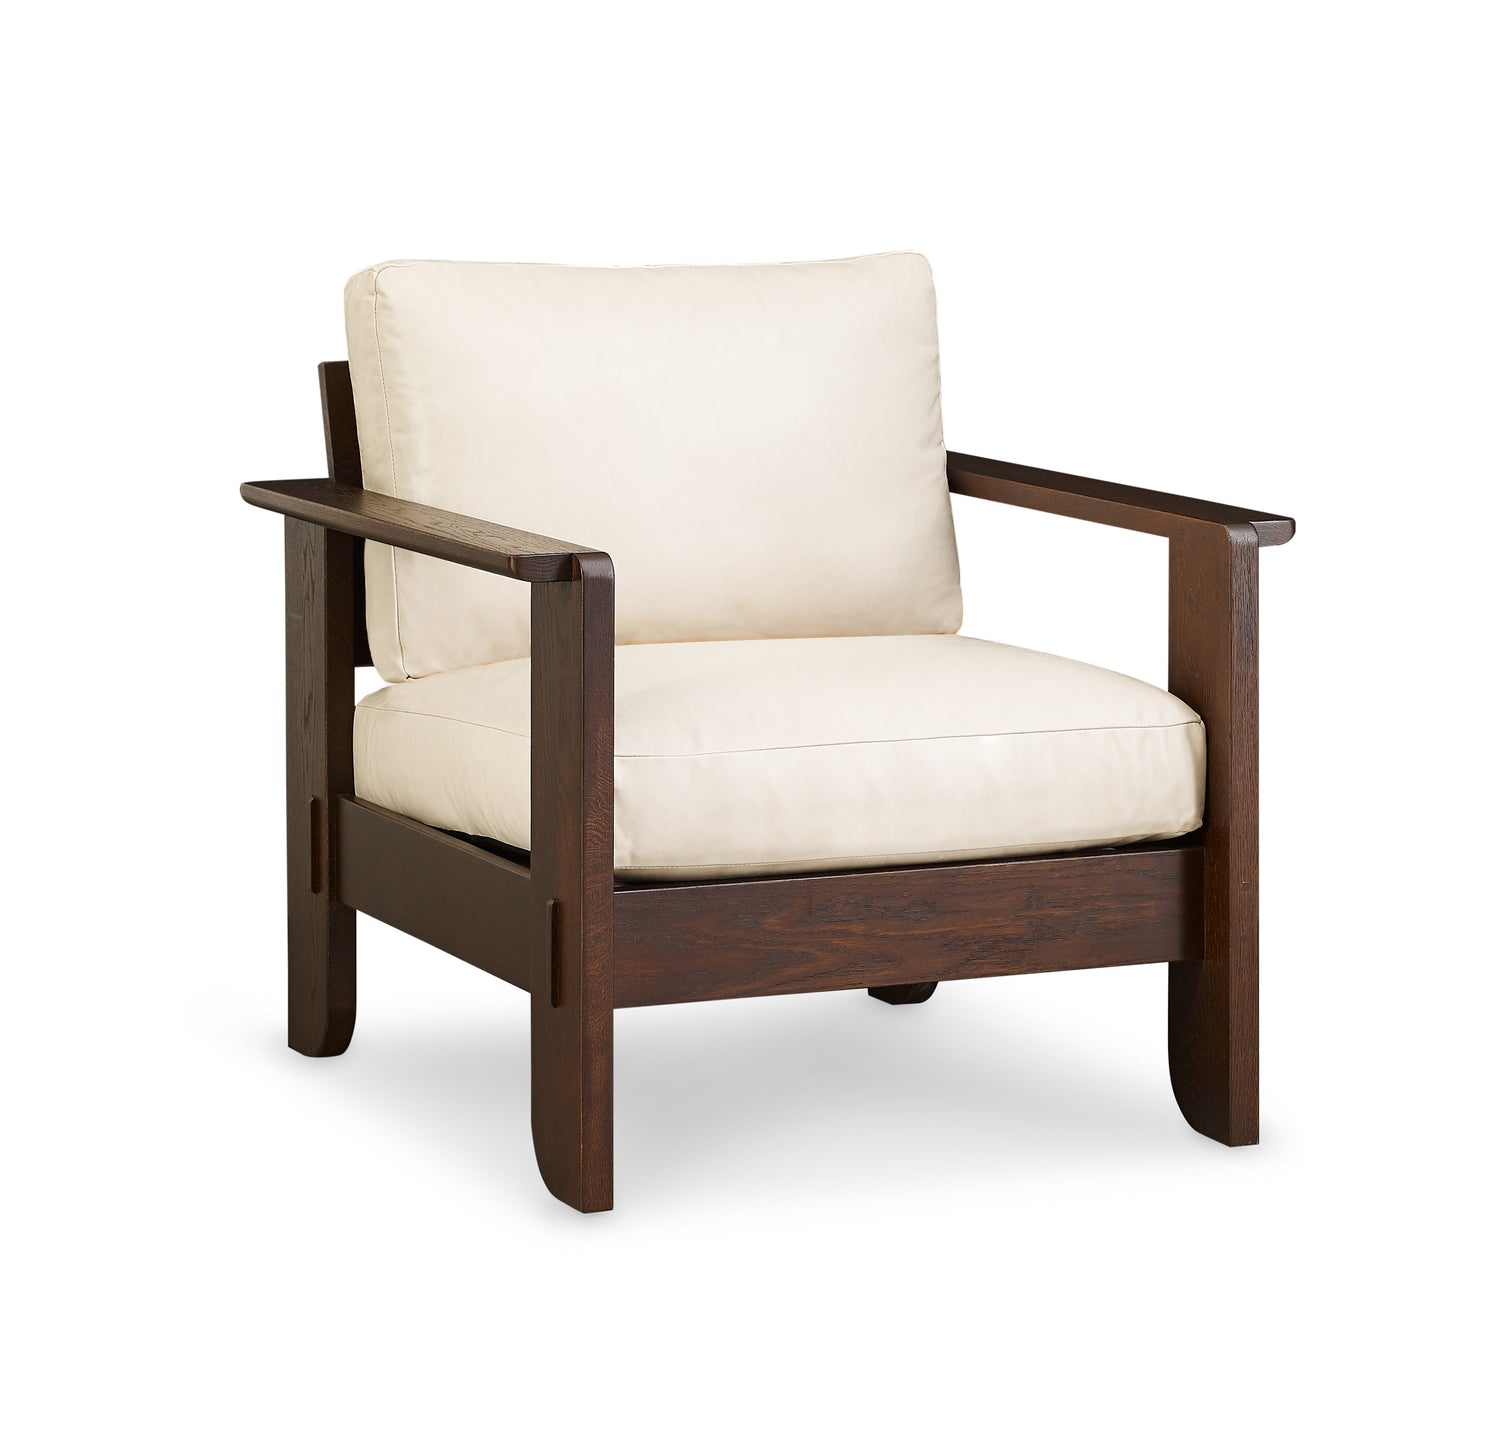 Dearborn Wood-Frame Lounge Chair - Stickley Brand